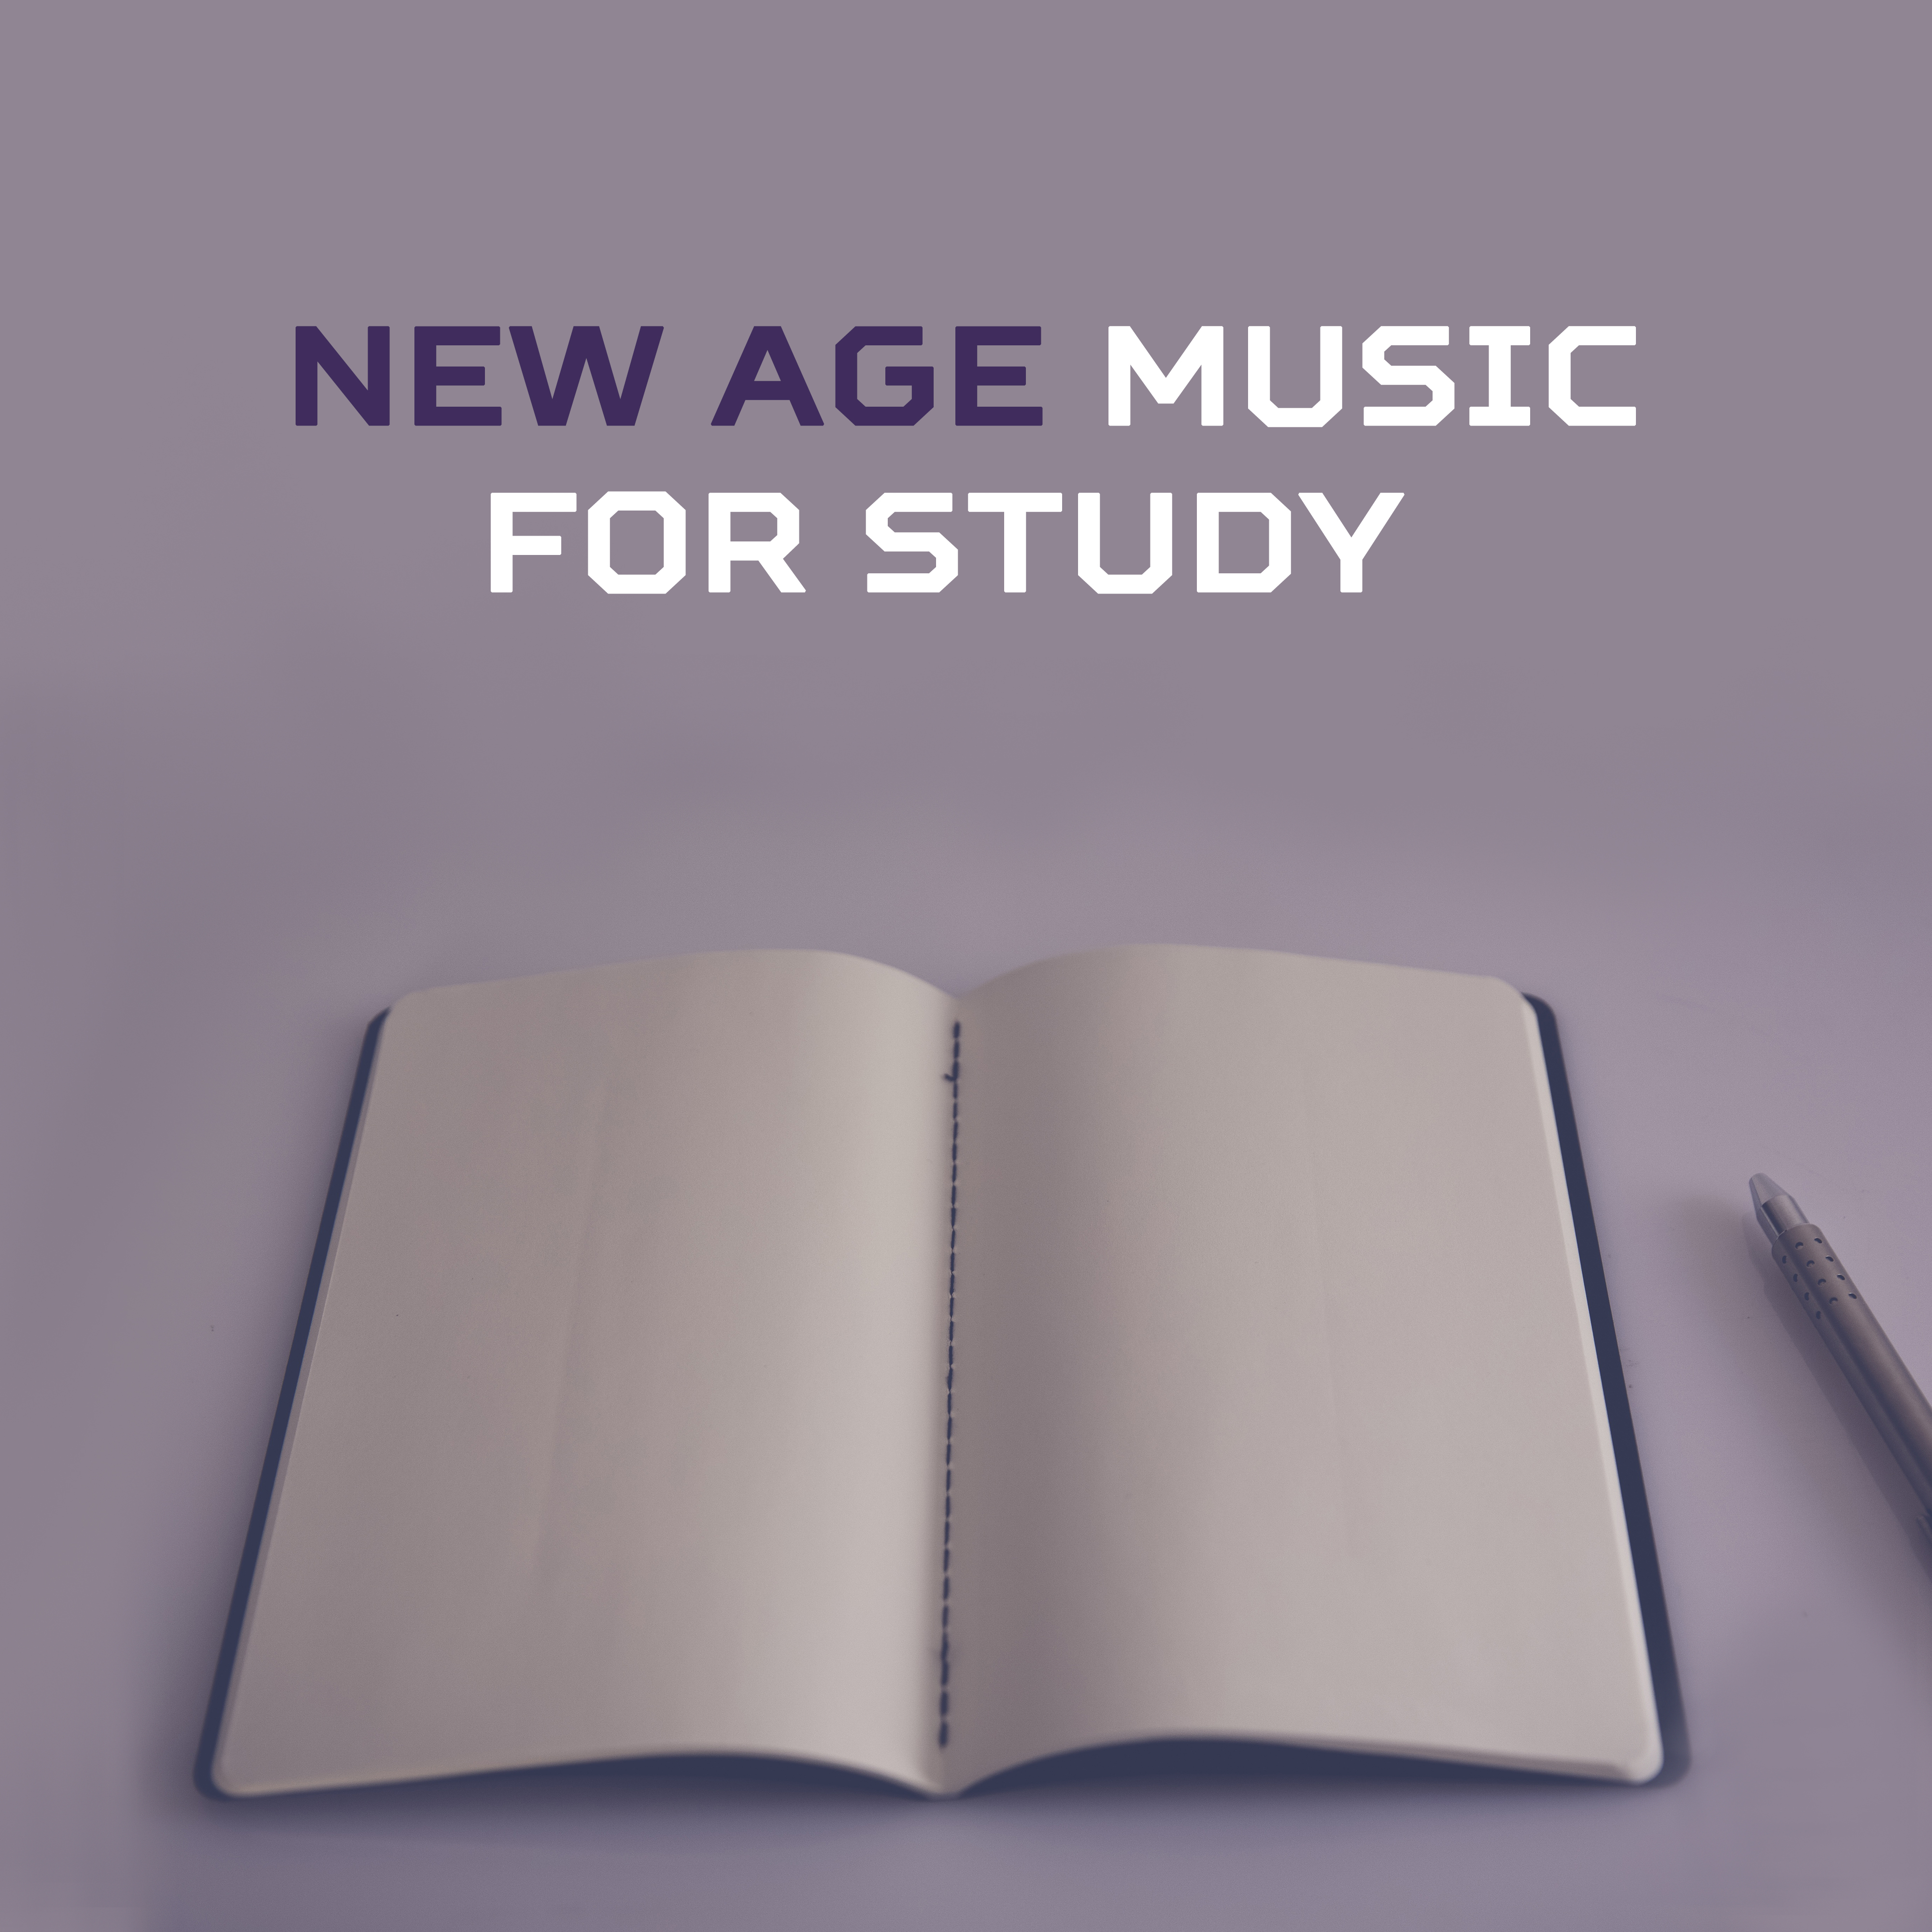 New Age Music for Study  Better Memory, Deep Focus, Soft Sounds for Concentration, Stress Relief, Relaxation, Easy Work